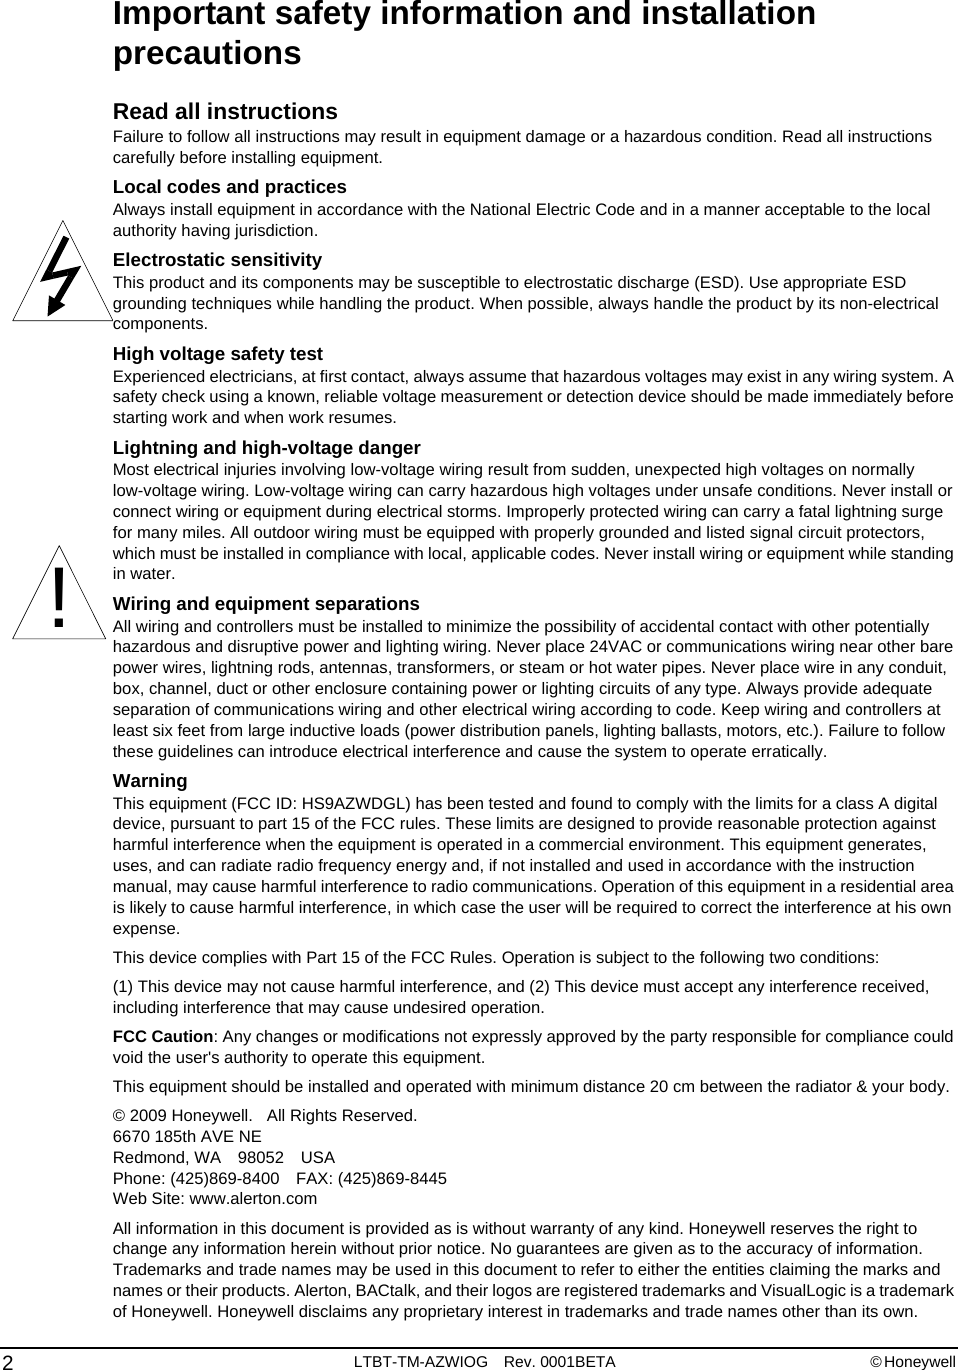 Important safety information and installation precautionsRead all instructionsFailure to follow all instructions may result in equipment damage or a hazardous condition. Read all instructions carefully before installing equipment.Local codes and practicesAlways install equipment in accordance with the National Electric Code and in a manner acceptable to the local authority having jurisdiction.Electrostatic sensitivityThis product and its components may be susceptible to electrostatic discharge (ESD). Use appropriate ESD grounding techniques while handling the product. When possible, always handle the product by its non-electrical components.High voltage safety testExperienced electricians, at first contact, always assume that hazardous voltages may exist in any wiring system. A safety check using a known, reliable voltage measurement or detection device should be made immediately before starting work and when work resumes.Lightning and high-voltage dangerMost electrical injuries involving low-voltage wiring result from sudden, unexpected high voltages on normally low-voltage wiring. Low-voltage wiring can carry hazardous high voltages under unsafe conditions. Never install or connect wiring or equipment during electrical storms. Improperly protected wiring can carry a fatal lightning surge for many miles. All outdoor wiring must be equipped with properly grounded and listed signal circuit protectors, which must be installed in compliance with local, applicable codes. Never install wiring or equipment while standing in water.Wiring and equipment separationsAll wiring and controllers must be installed to minimize the possibility of accidental contact with other potentially hazardous and disruptive power and lighting wiring. Never place 24VAC or communications wiring near other bare power wires, lightning rods, antennas, transformers, or steam or hot water pipes. Never place wire in any conduit, box, channel, duct or other enclosure containing power or lighting circuits of any type. Always provide adequate separation of communications wiring and other electrical wiring according to code. Keep wiring and controllers at least six feet from large inductive loads (power distribution panels, lighting ballasts, motors, etc.). Failure to follow these guidelines can introduce electrical interference and cause the system to operate erratically.WarningThis equipment (FCC ID: HS9AZWDGL) has been tested and found to comply with the limits for a class A digital device, pursuant to part 15 of the FCC rules. These limits are designed to provide reasonable protection against harmful interference when the equipment is operated in a commercial environment. This equipment generates, uses, and can radiate radio frequency energy and, if not installed and used in accordance with the instruction manual, may cause harmful interference to radio communications. Operation of this equipment in a residential area is likely to cause harmful interference, in which case the user will be required to correct the interference at his own expense.This device complies with Part 15 of the FCC Rules. Operation is subject to the following two conditions: (1) This device may not cause harmful interference, and (2) This device must accept any interference received, including interference that may cause undesired operation. FCC Caution: Any changes or modifications not expressly approved by the party responsible for compliance could void the user&apos;s authority to operate this equipment. This equipment should be installed and operated with minimum distance 20 cm between the radiator &amp; your body. © 2009 Honeywell.   All Rights Reserved.6670 185th AVE NERedmond, WA 98052 USAPhone: (425)869-8400 FAX: (425)869-8445Web Site: www.alerton.comAll information in this document is provided as is without warranty of any kind. Honeywell reserves the right to change any information herein without prior notice. No guarantees are given as to the accuracy of information. Trademarks and trade names may be used in this document to refer to either the entities claiming the marks and names or their products. Alerton, BACtalk, and their logos are registered trademarks and VisualLogic is a trademark of Honeywell. Honeywell disclaims any proprietary interest in trademarks and trade names other than its own.!2LTBT-TM-AZWIOG Rev. 0001BETA © Honeywell 